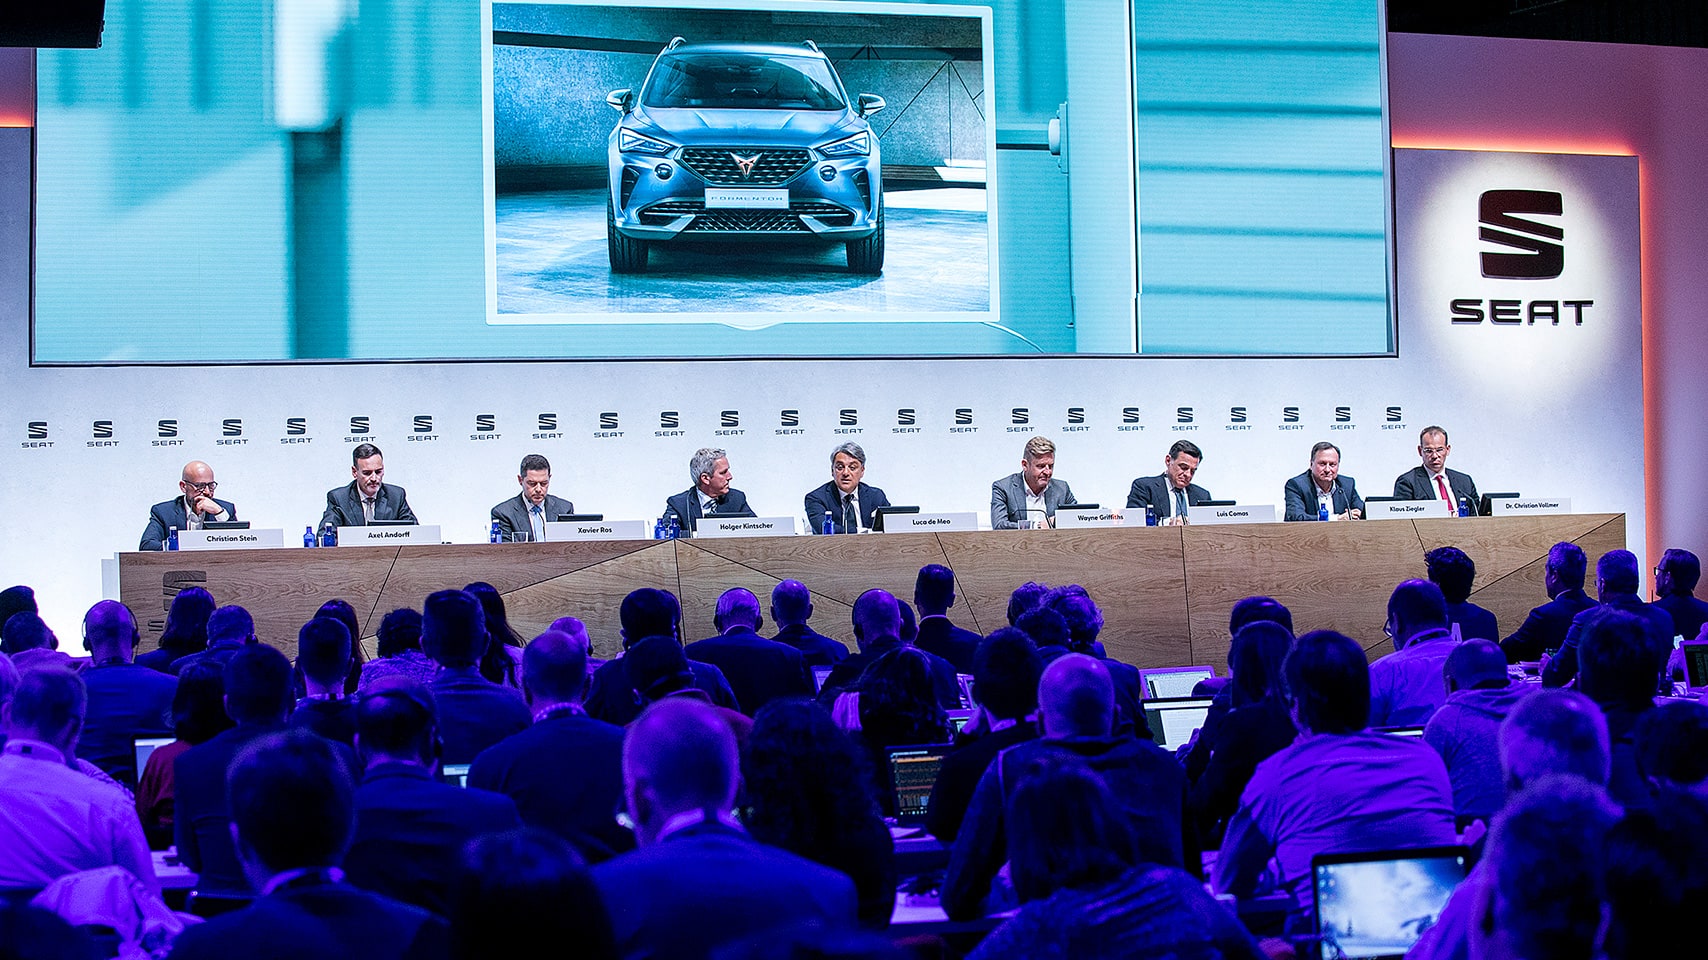 SEAT Committee Annual Media Conference with presentation